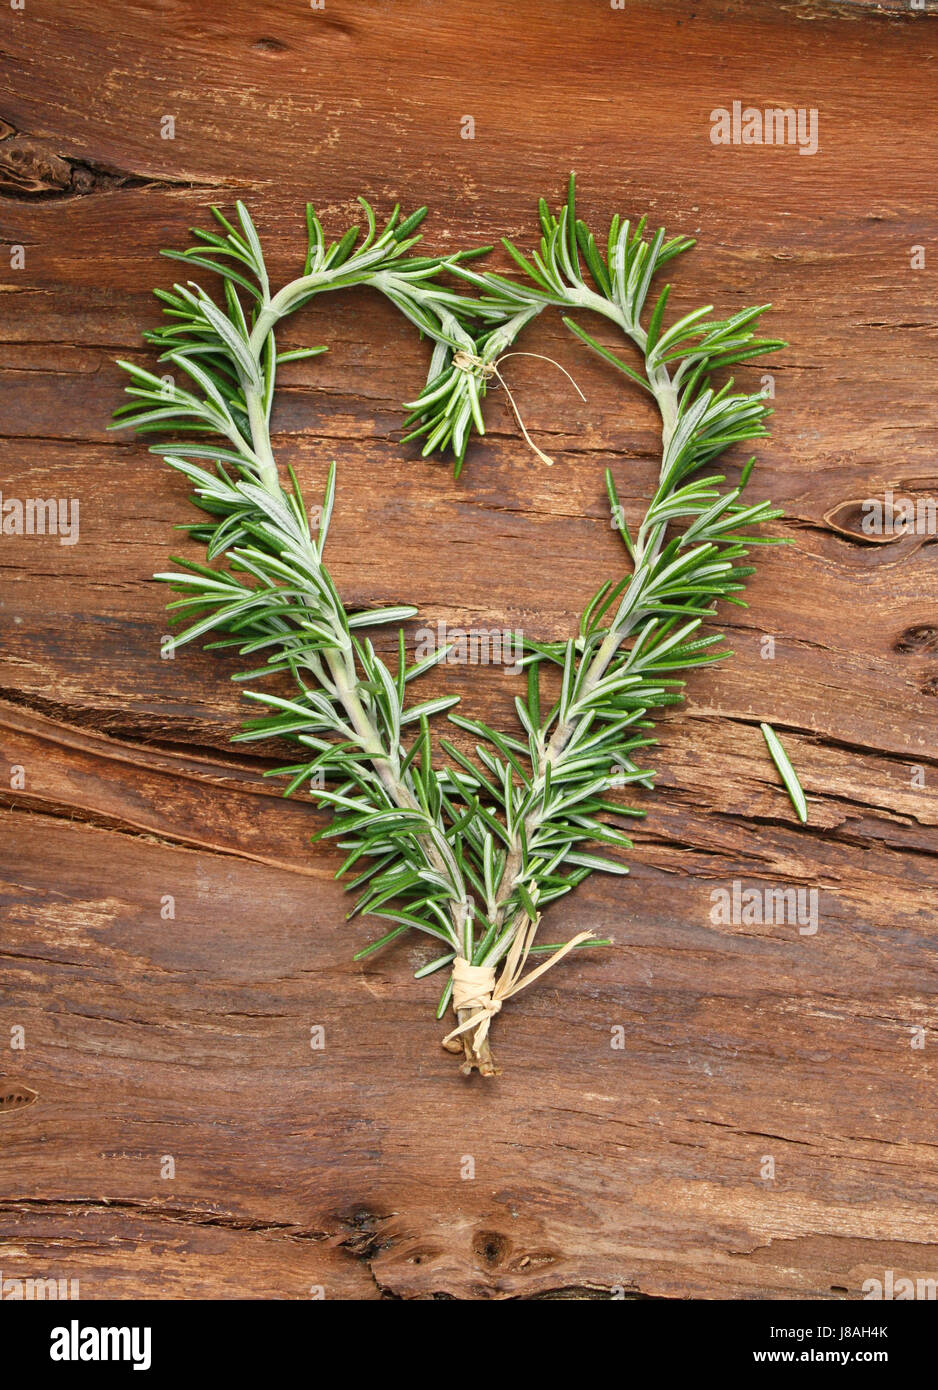 decoration, rosemary, heart, herbs, spice, green, wood, brown, brownish, Stock Photo